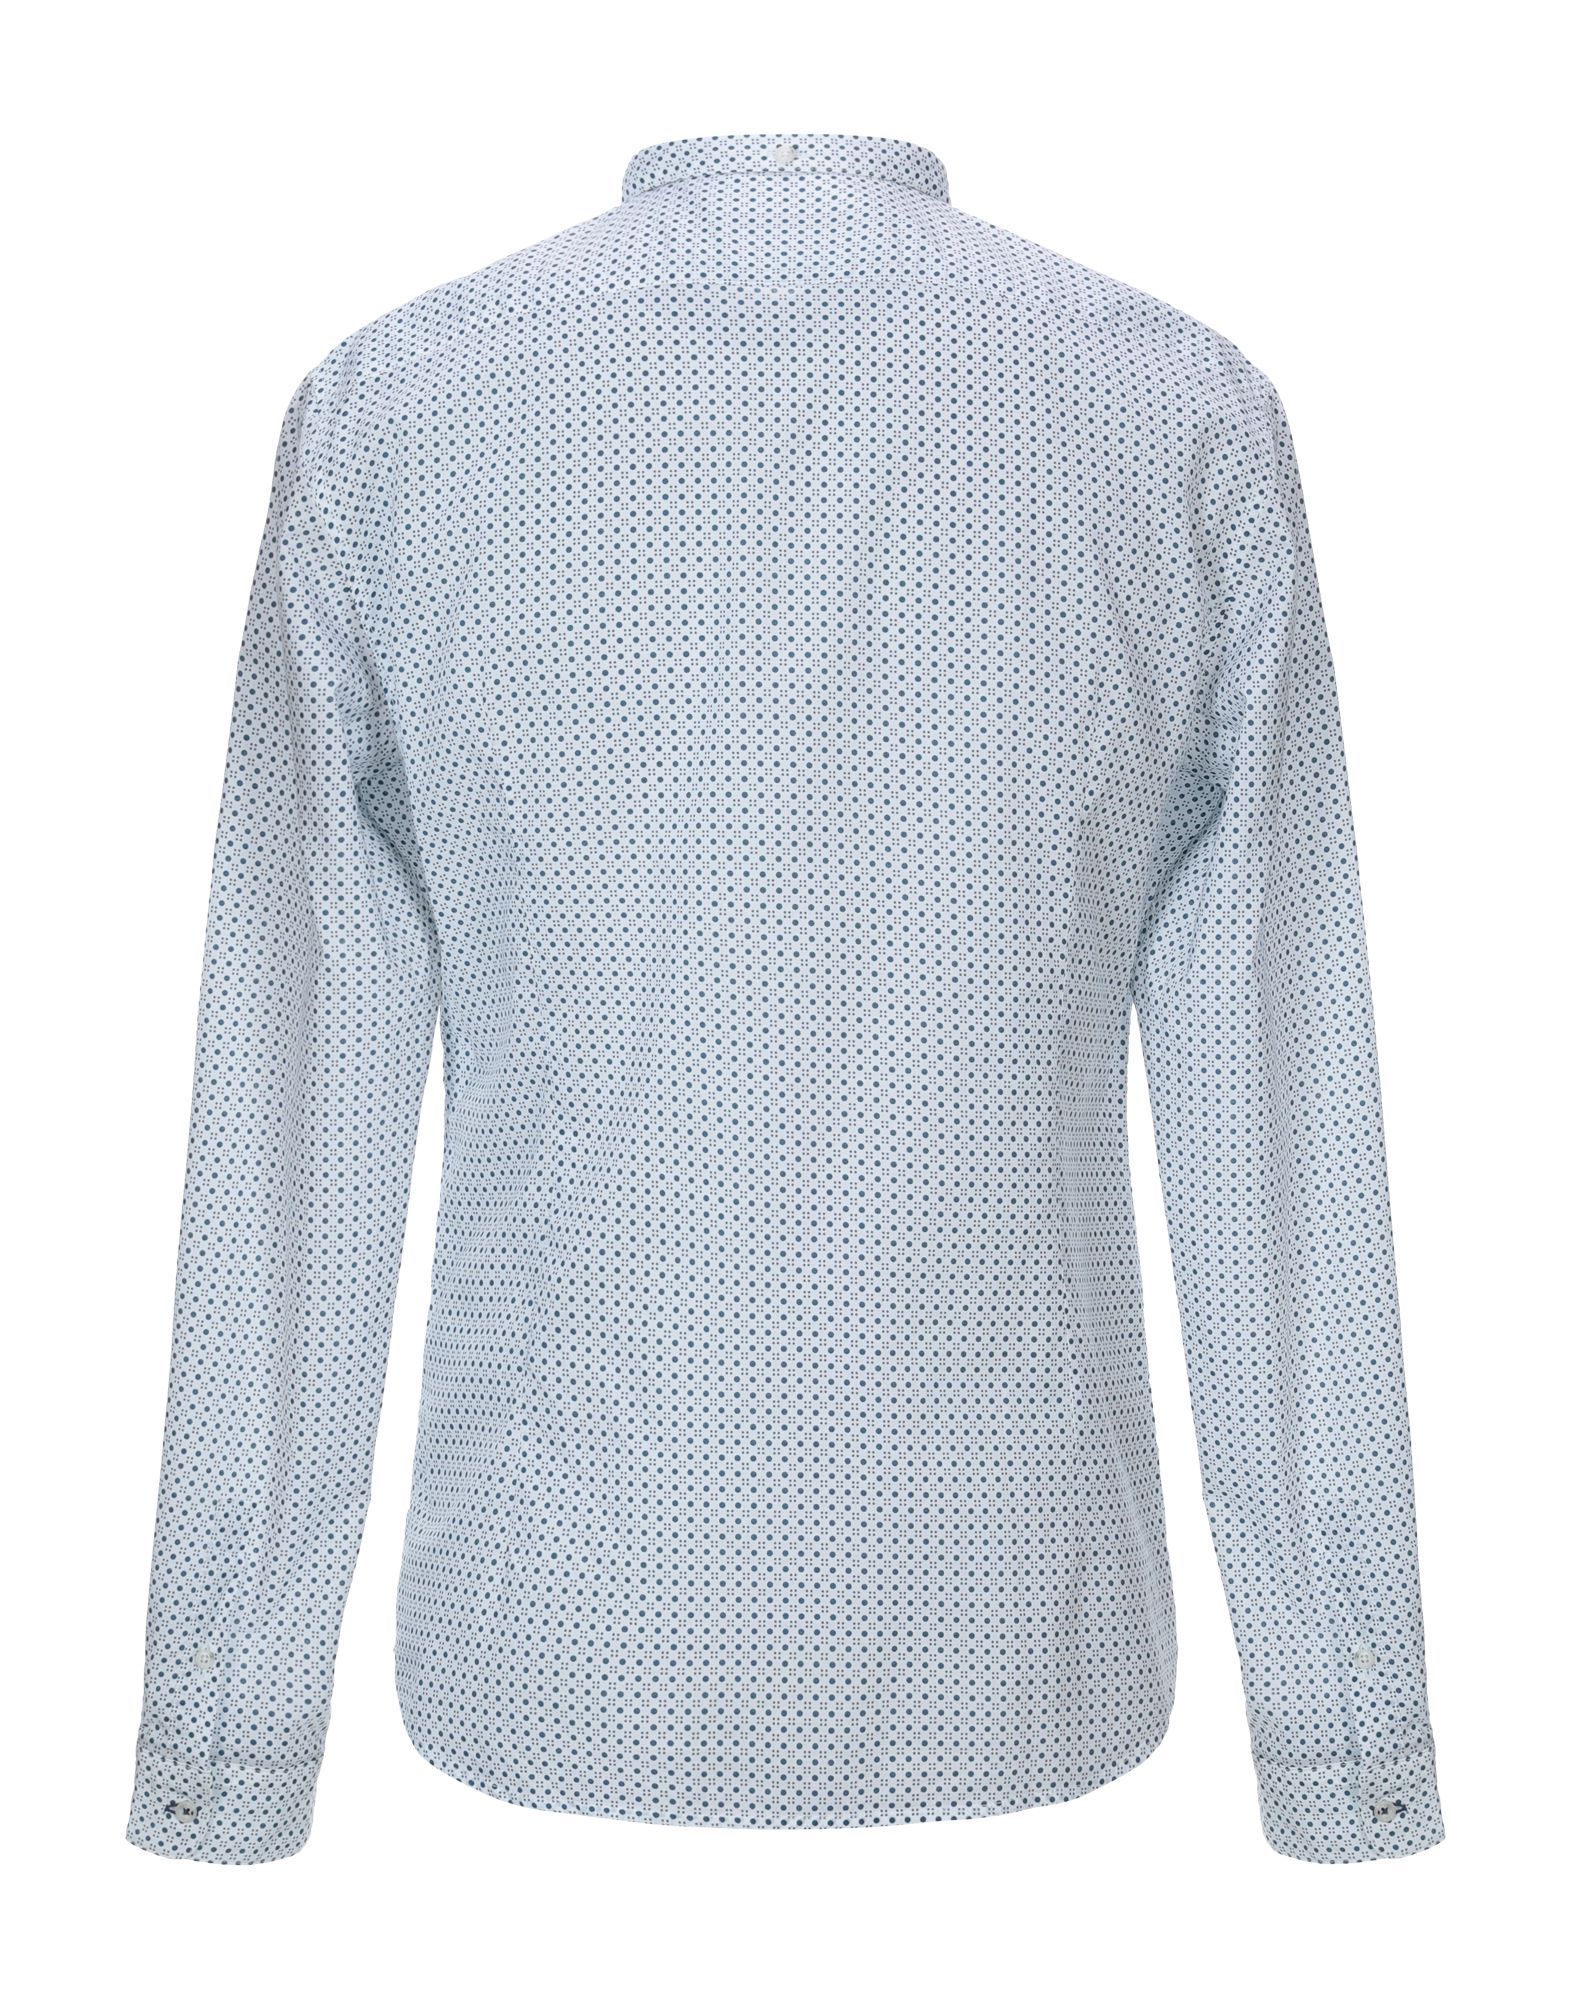 plain weave, no appliqu�s, polka dots, front closure, button closing, long sleeves, buttoned cuffs, classic neckline, single chest pocket